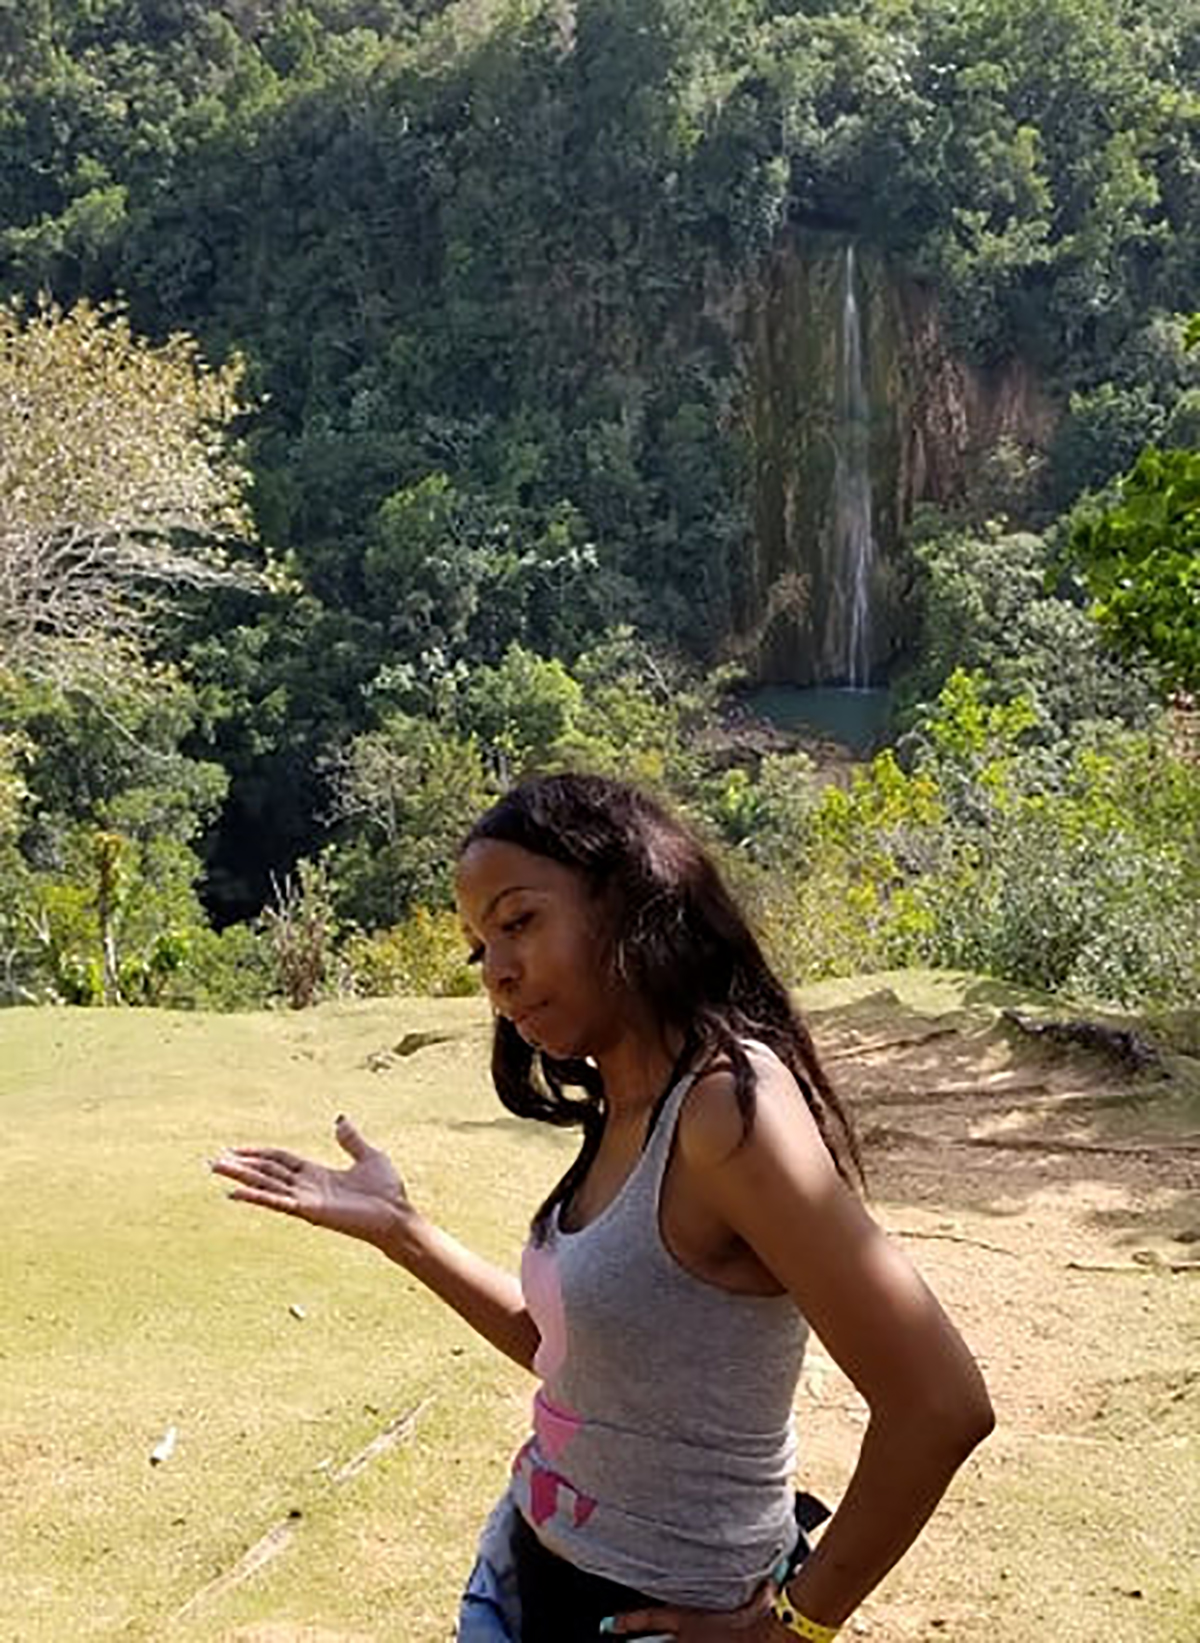 PHOTO: Portia Ravenelle is seen in this image taken March 26, 2019 at the waterfall of El Limon, Samana, Dominican Republic.